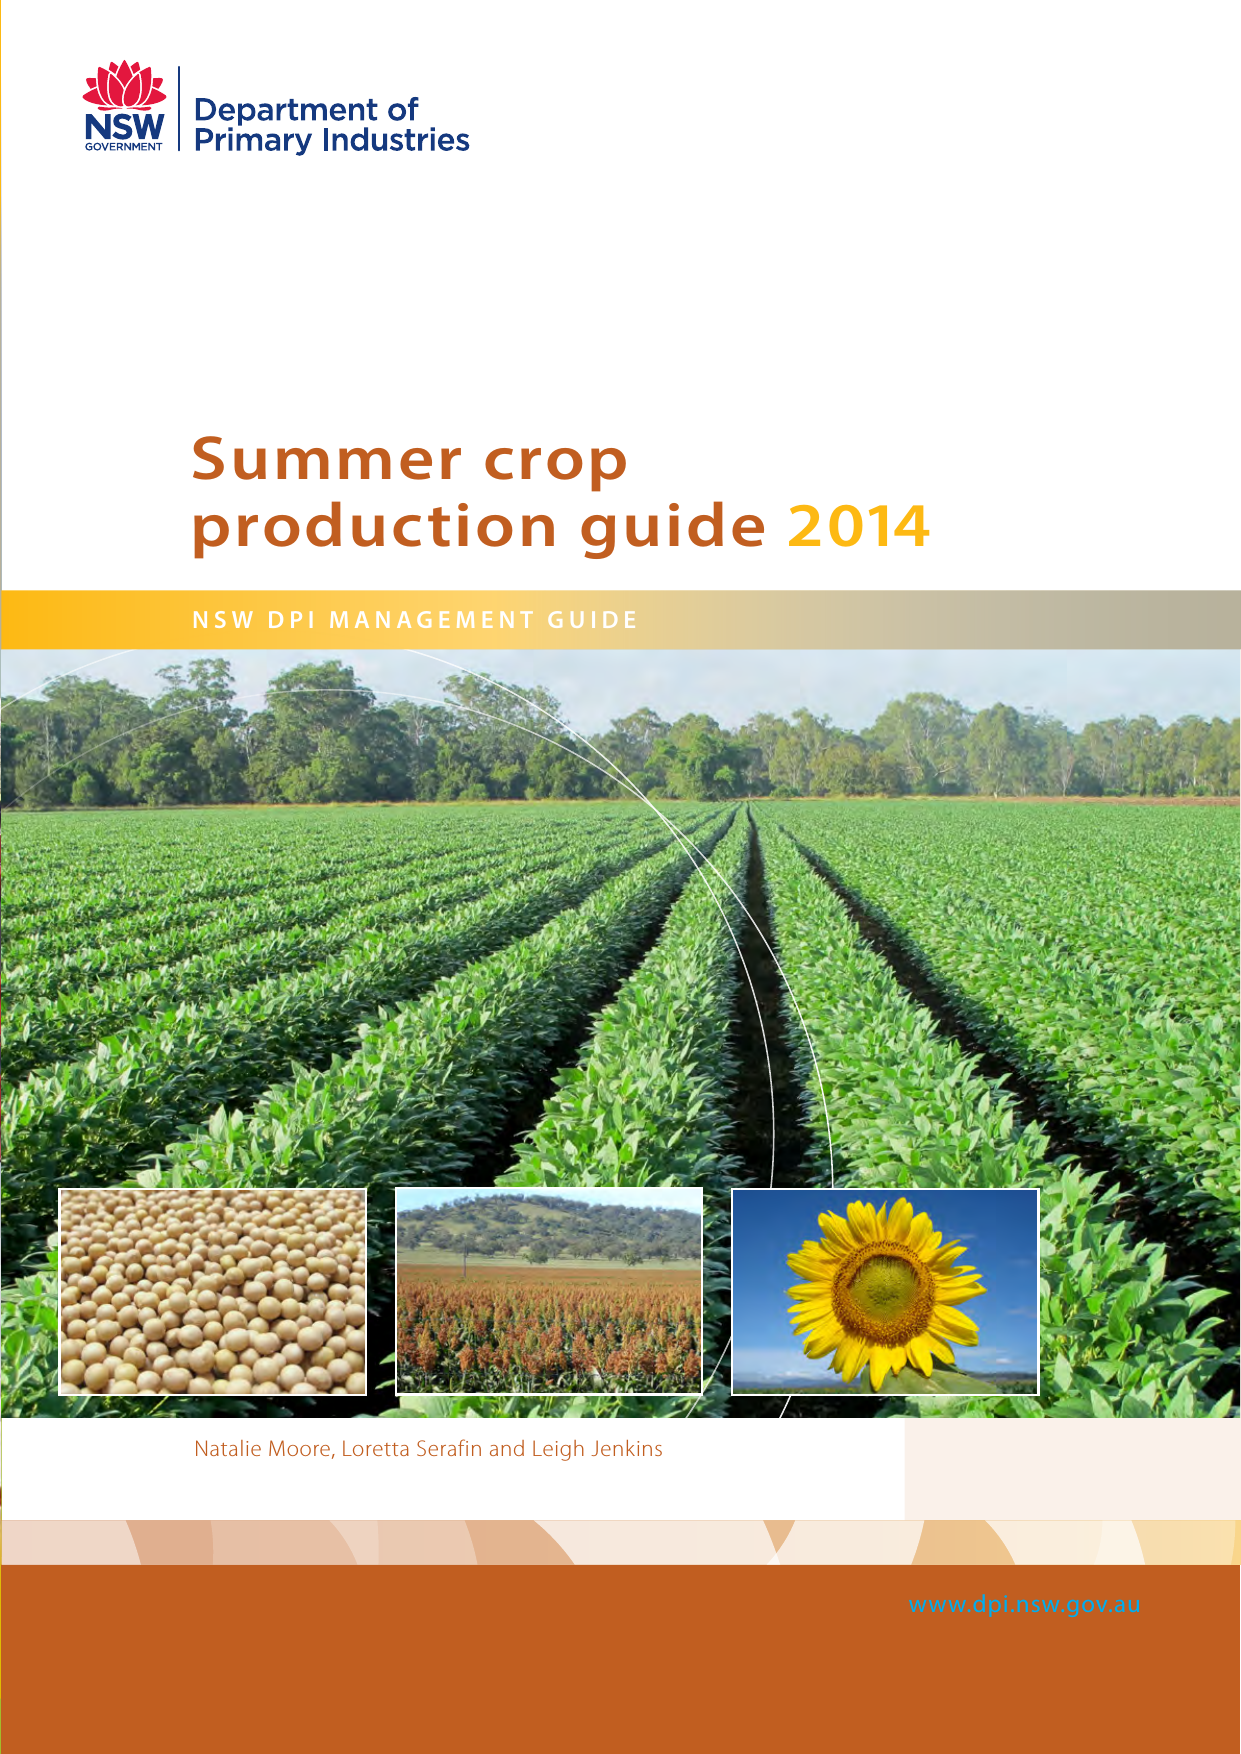 Summer crop production guide 2014